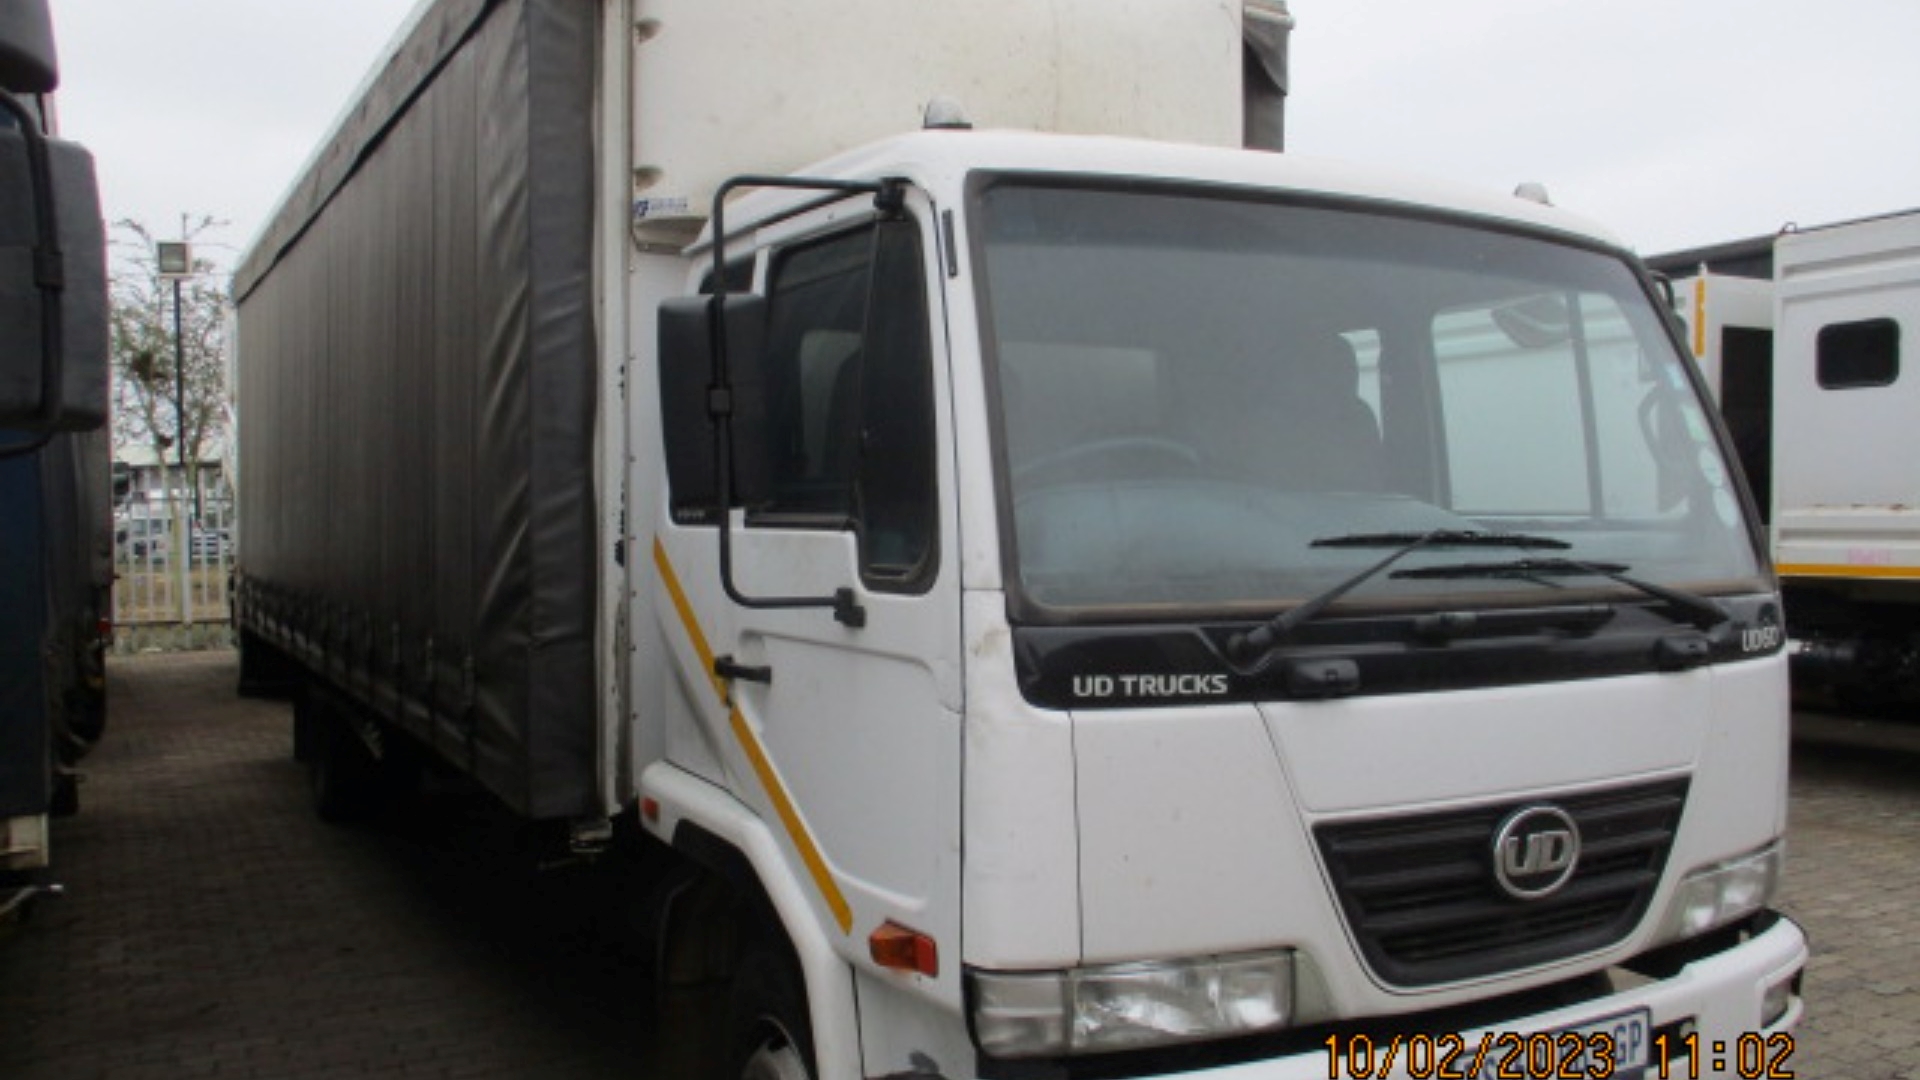 Nissan Curtain side trucks NISSAN UD60 WITH 7 .2 M TAUTLINER 2015 for sale by Isando Truck and Trailer | Truck & Trailer Marketplace